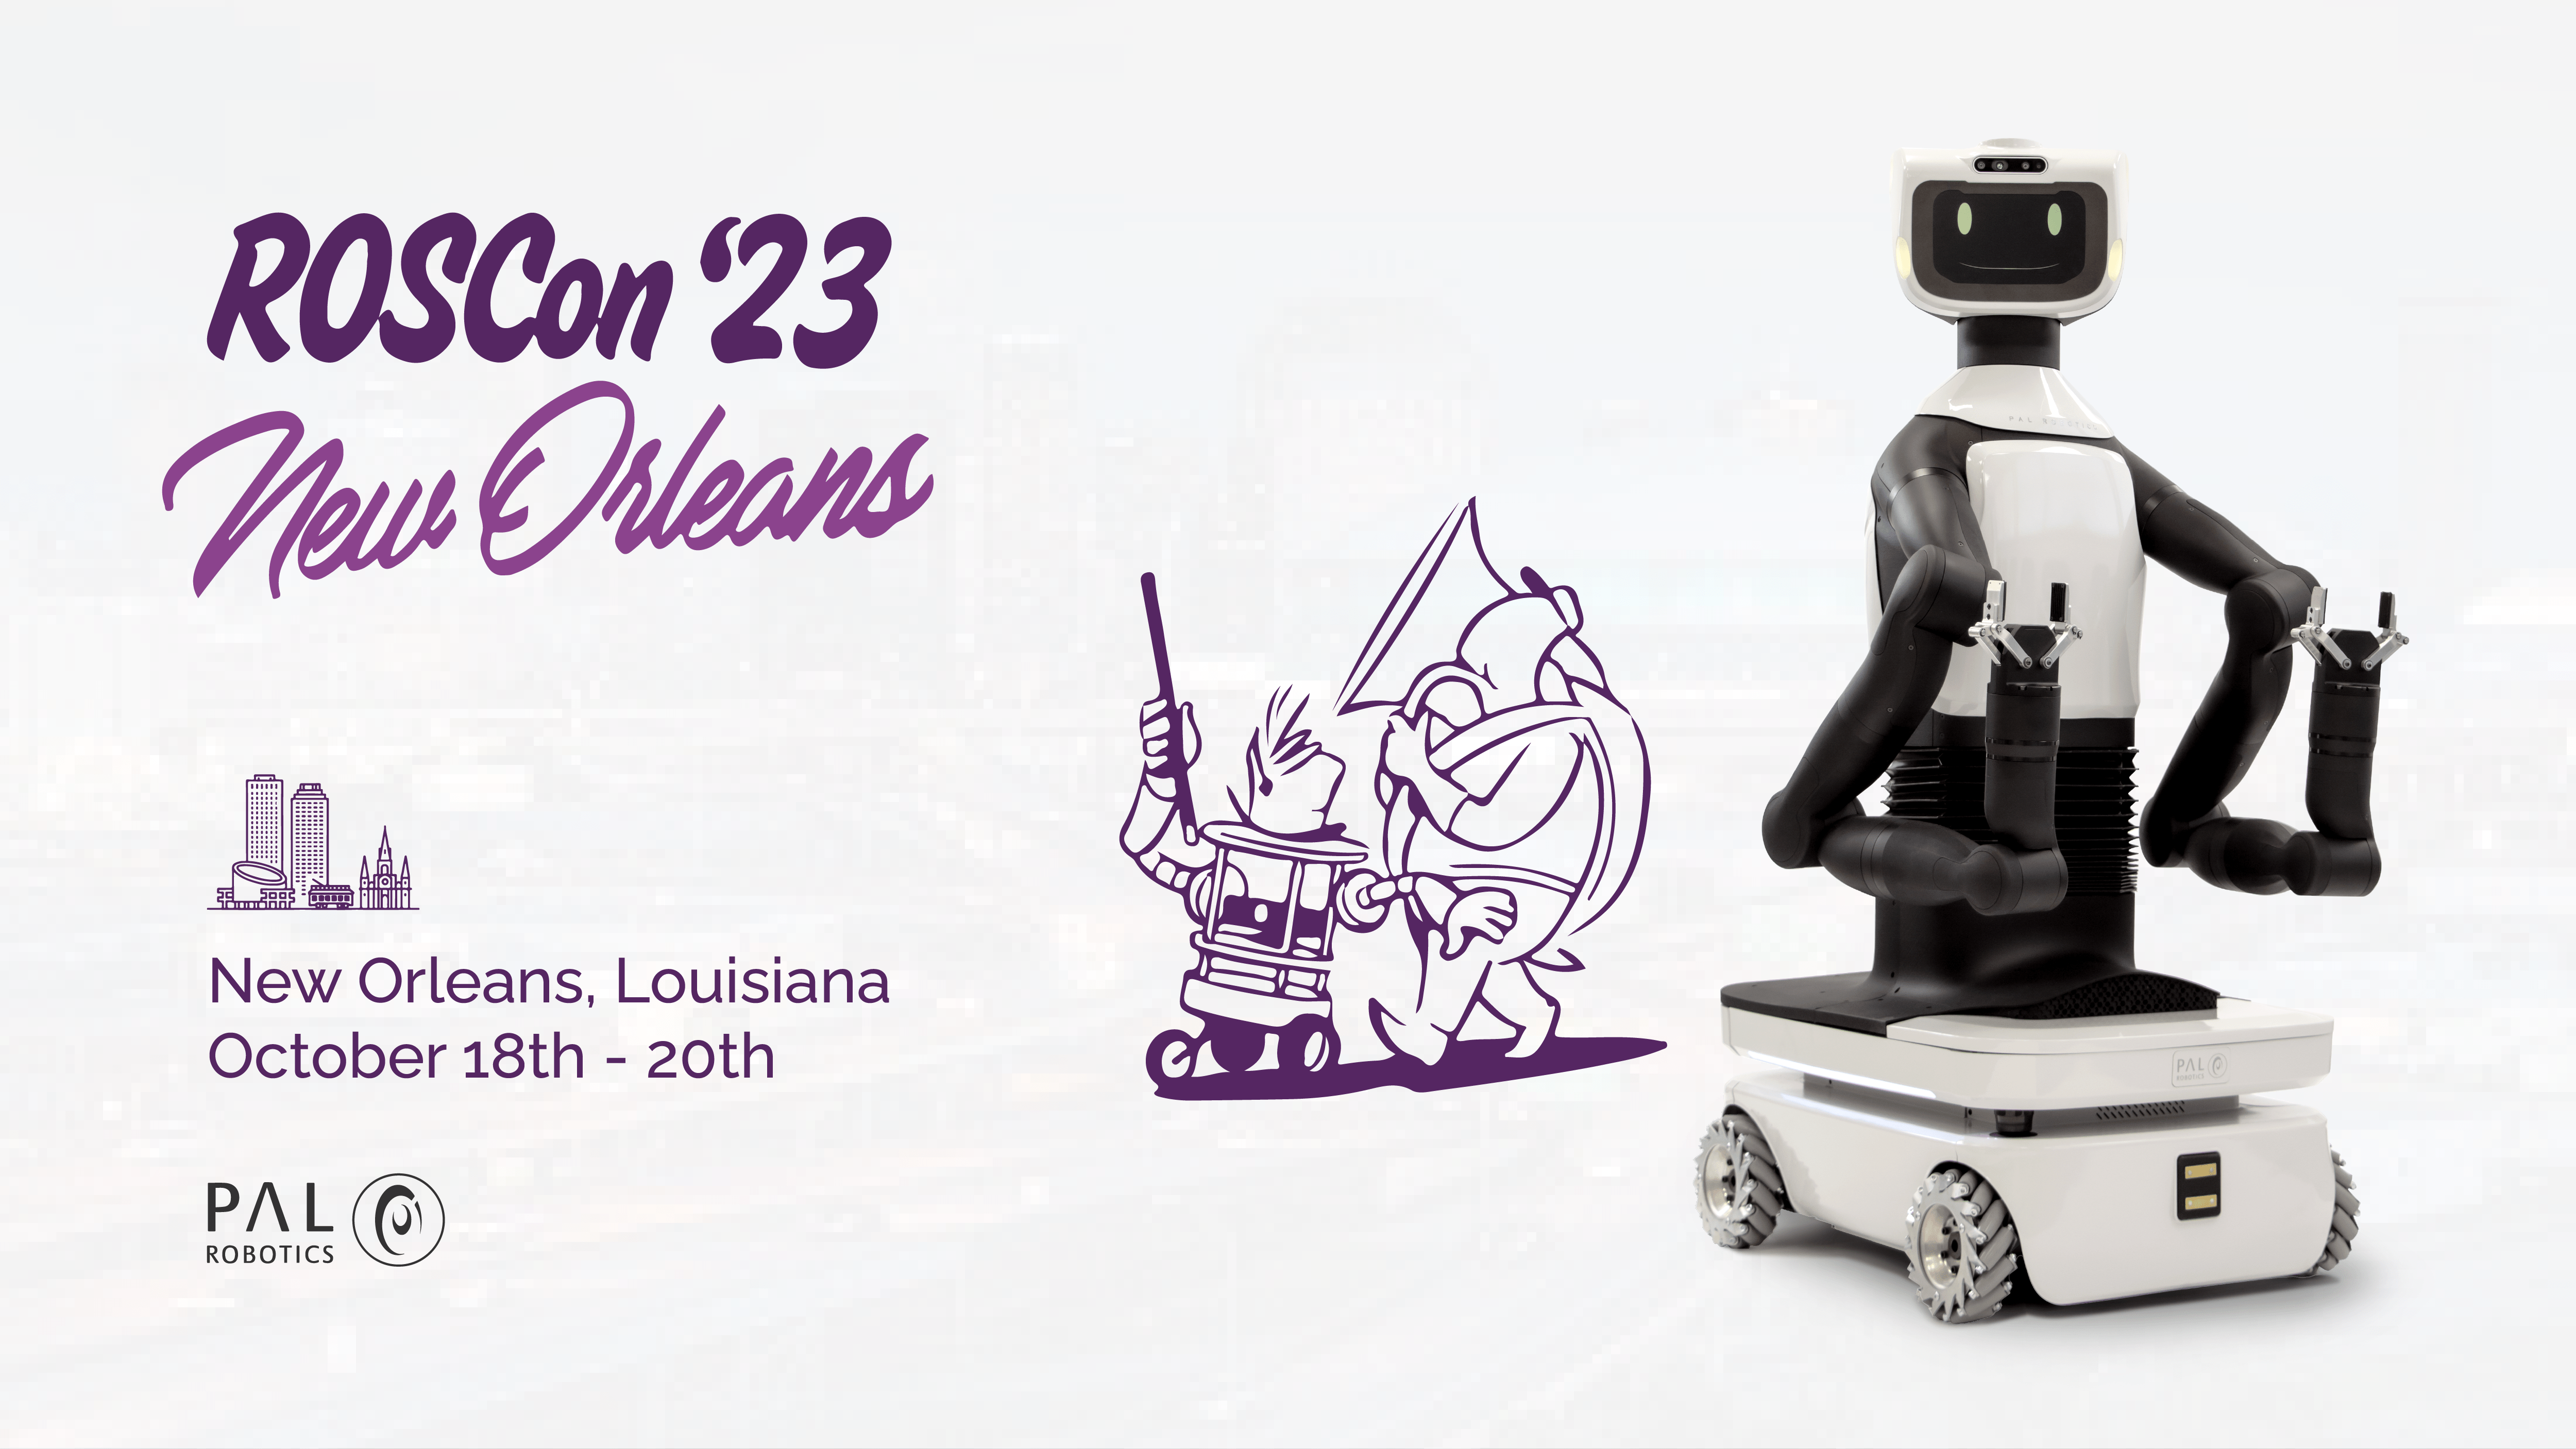 TIAGo Pro robot with a image of ROSCon in New Orleans